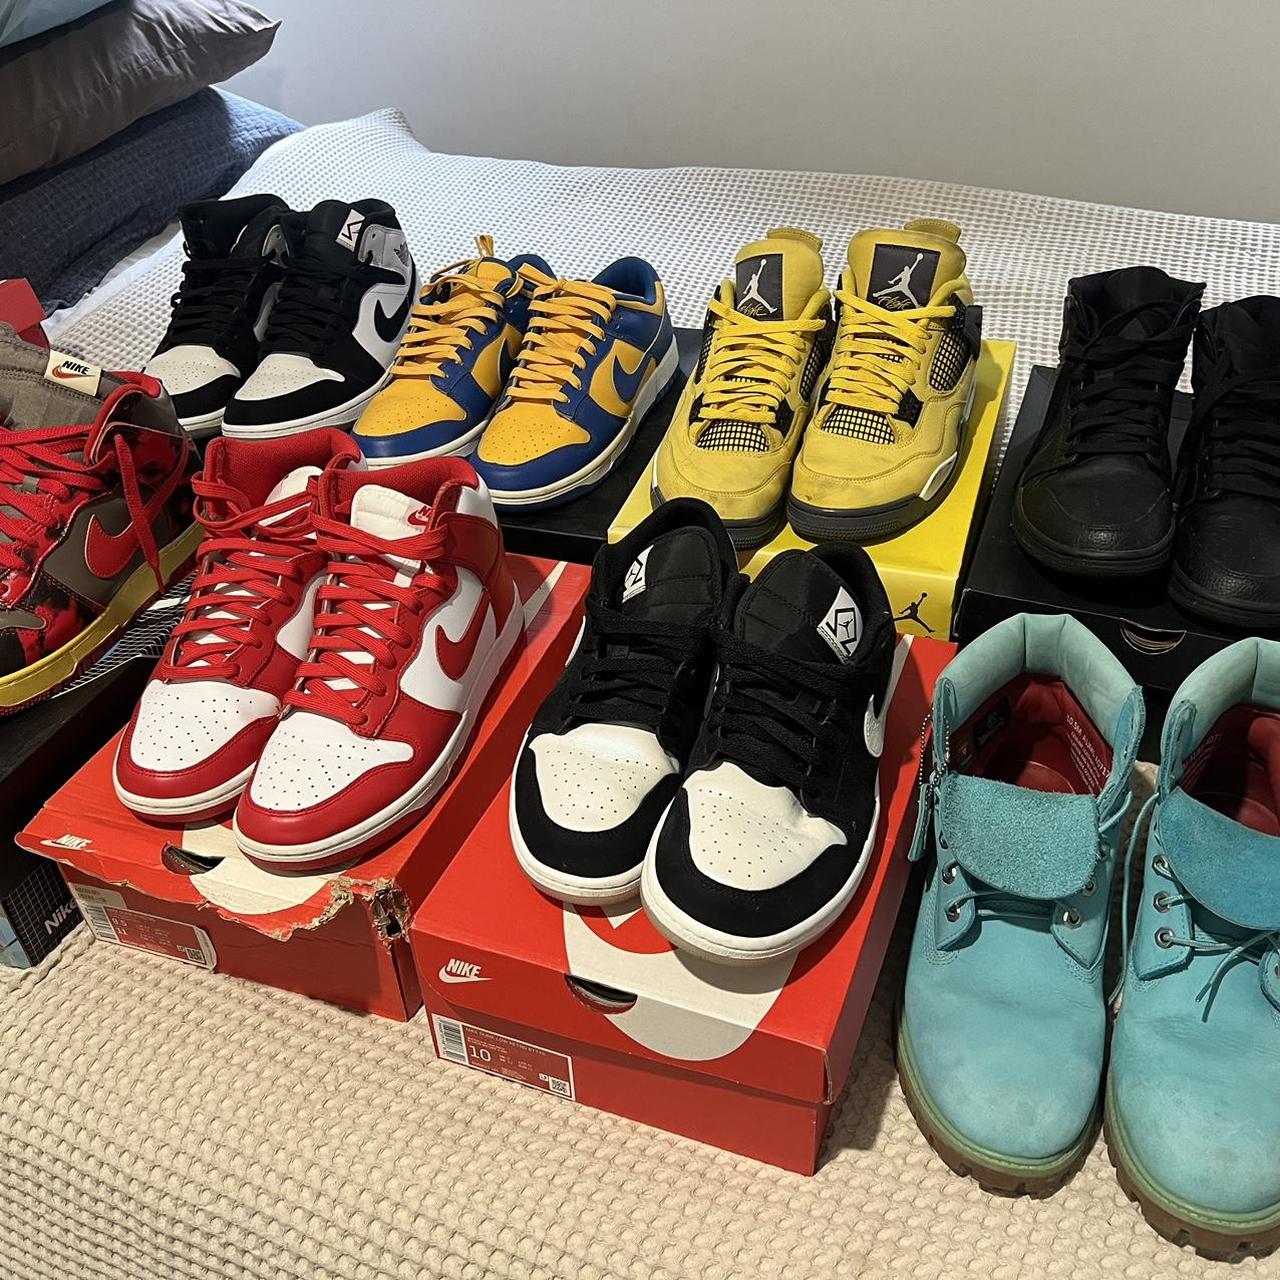 Selling treasured Shoes collected over the years as... - Depop